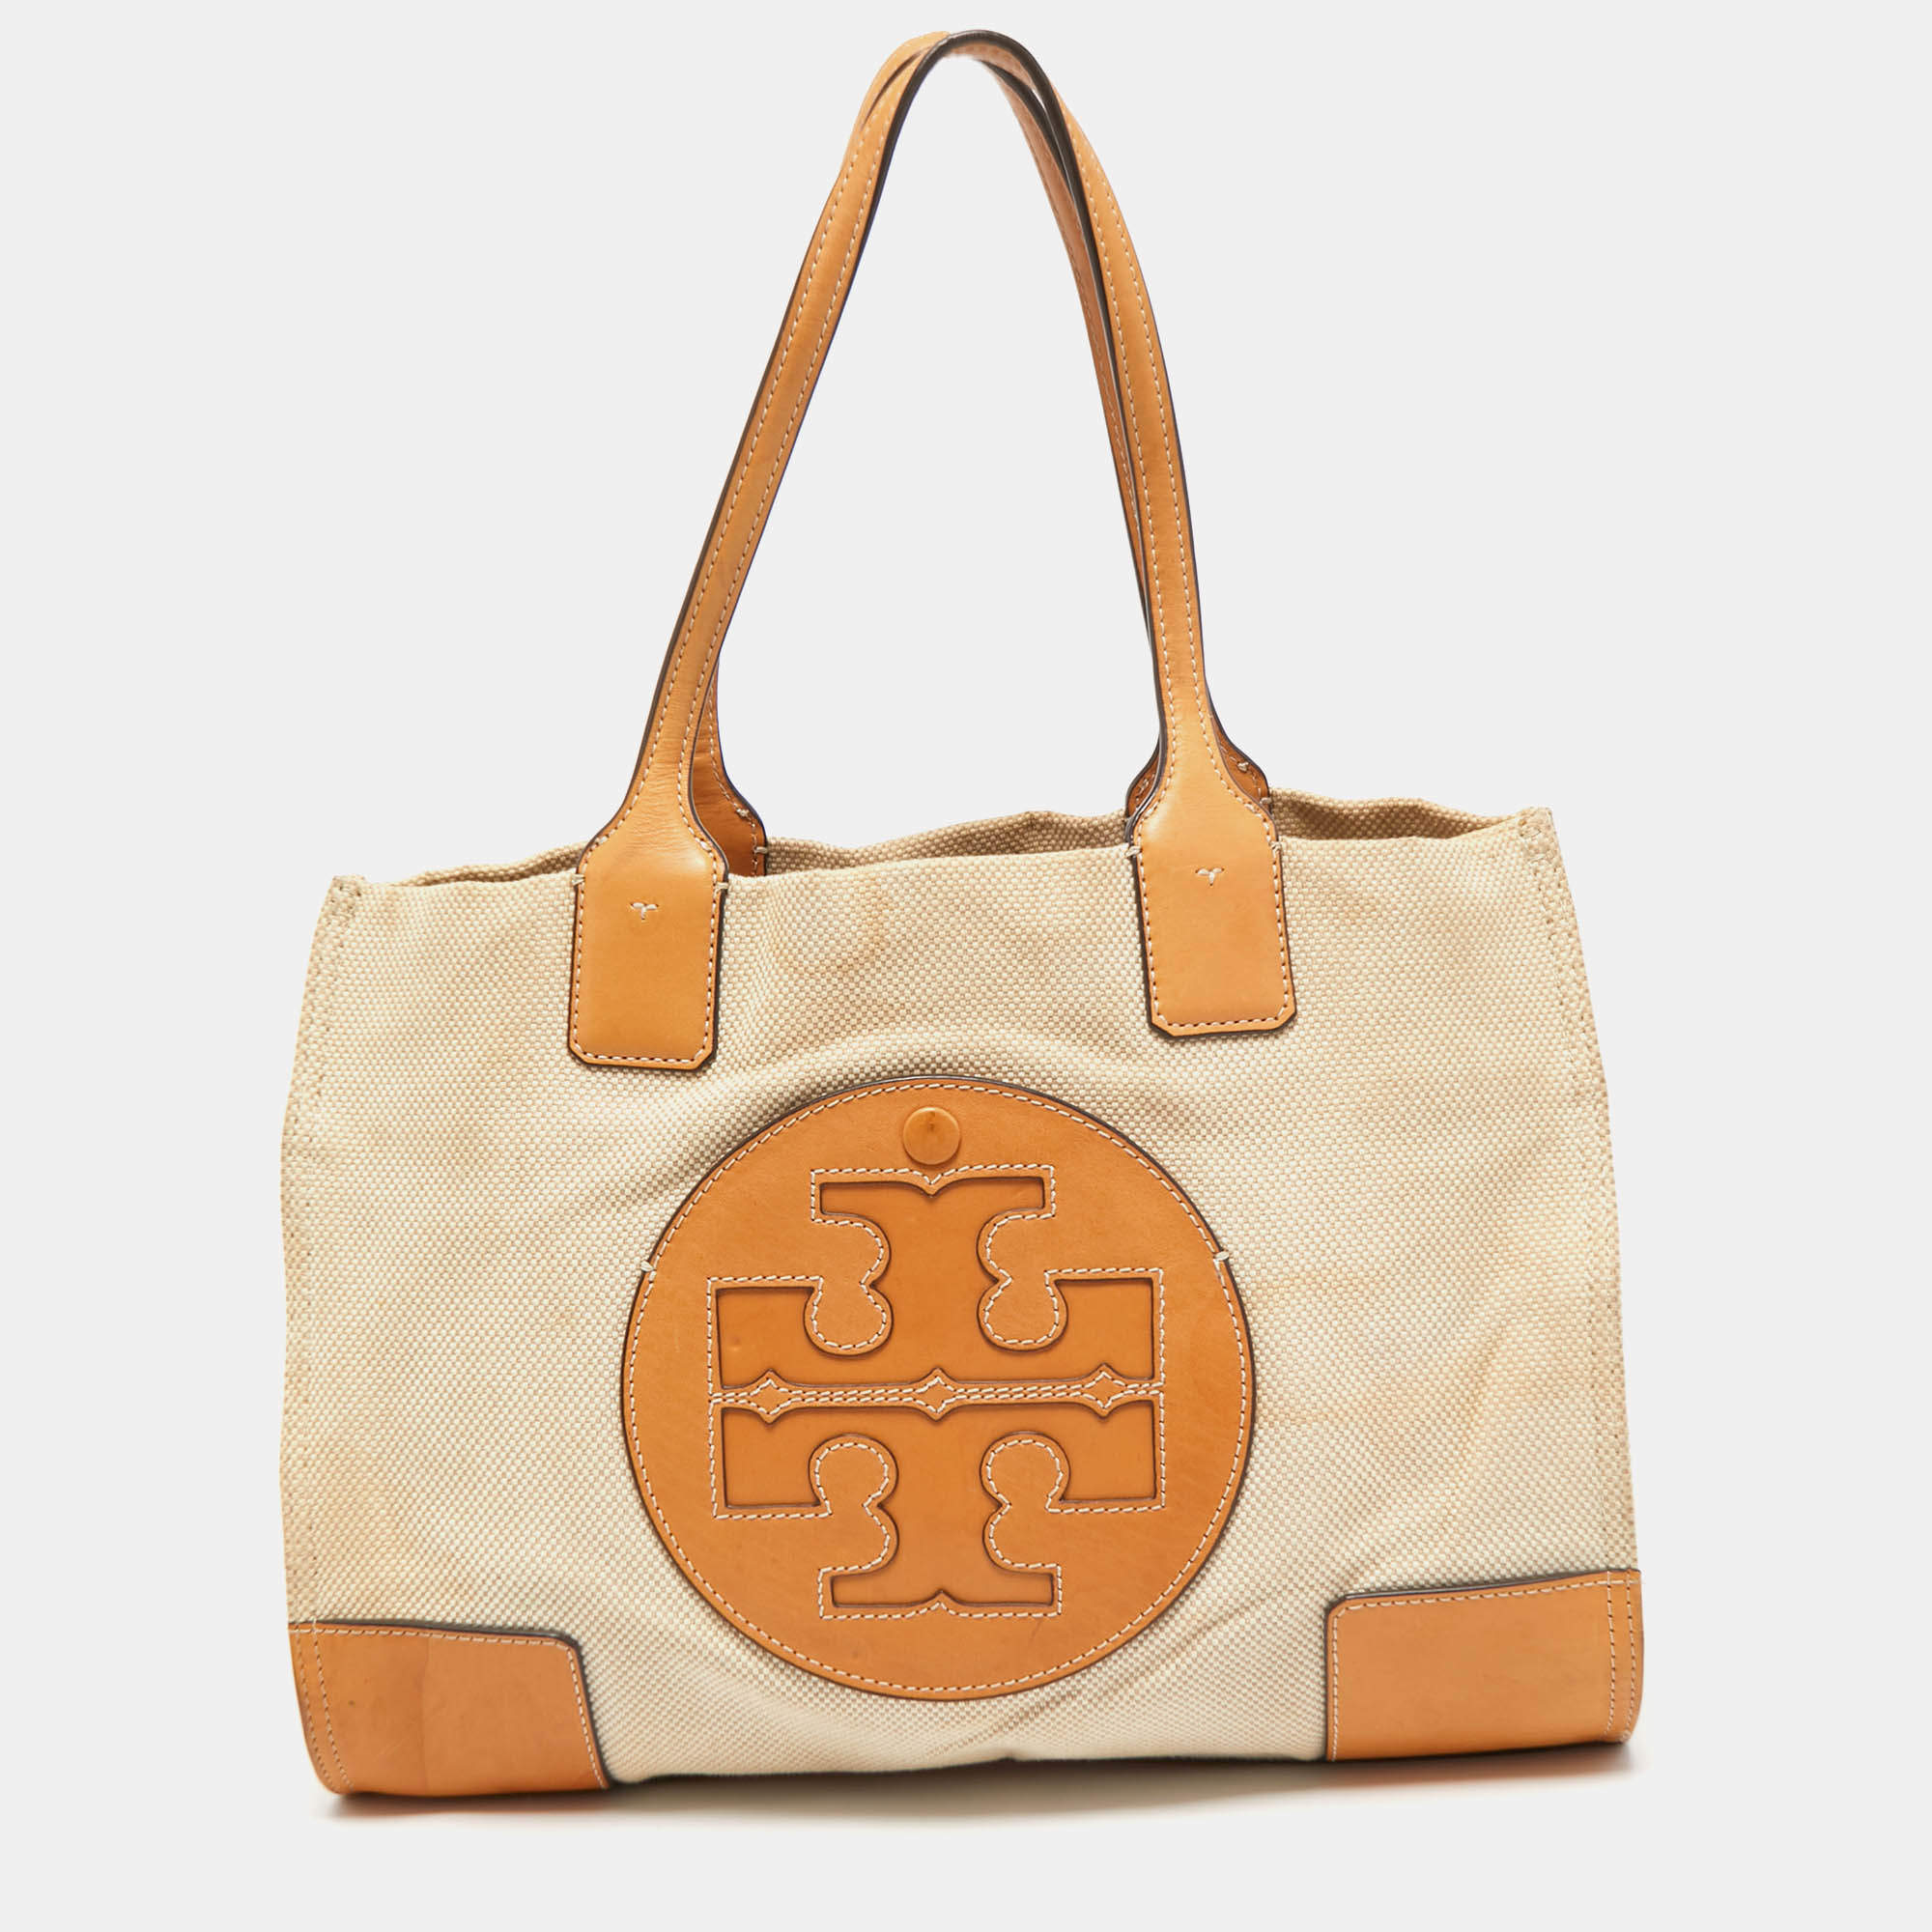 Tory Burch, Bags, Tory Burch Ella Canvas Leather Tote